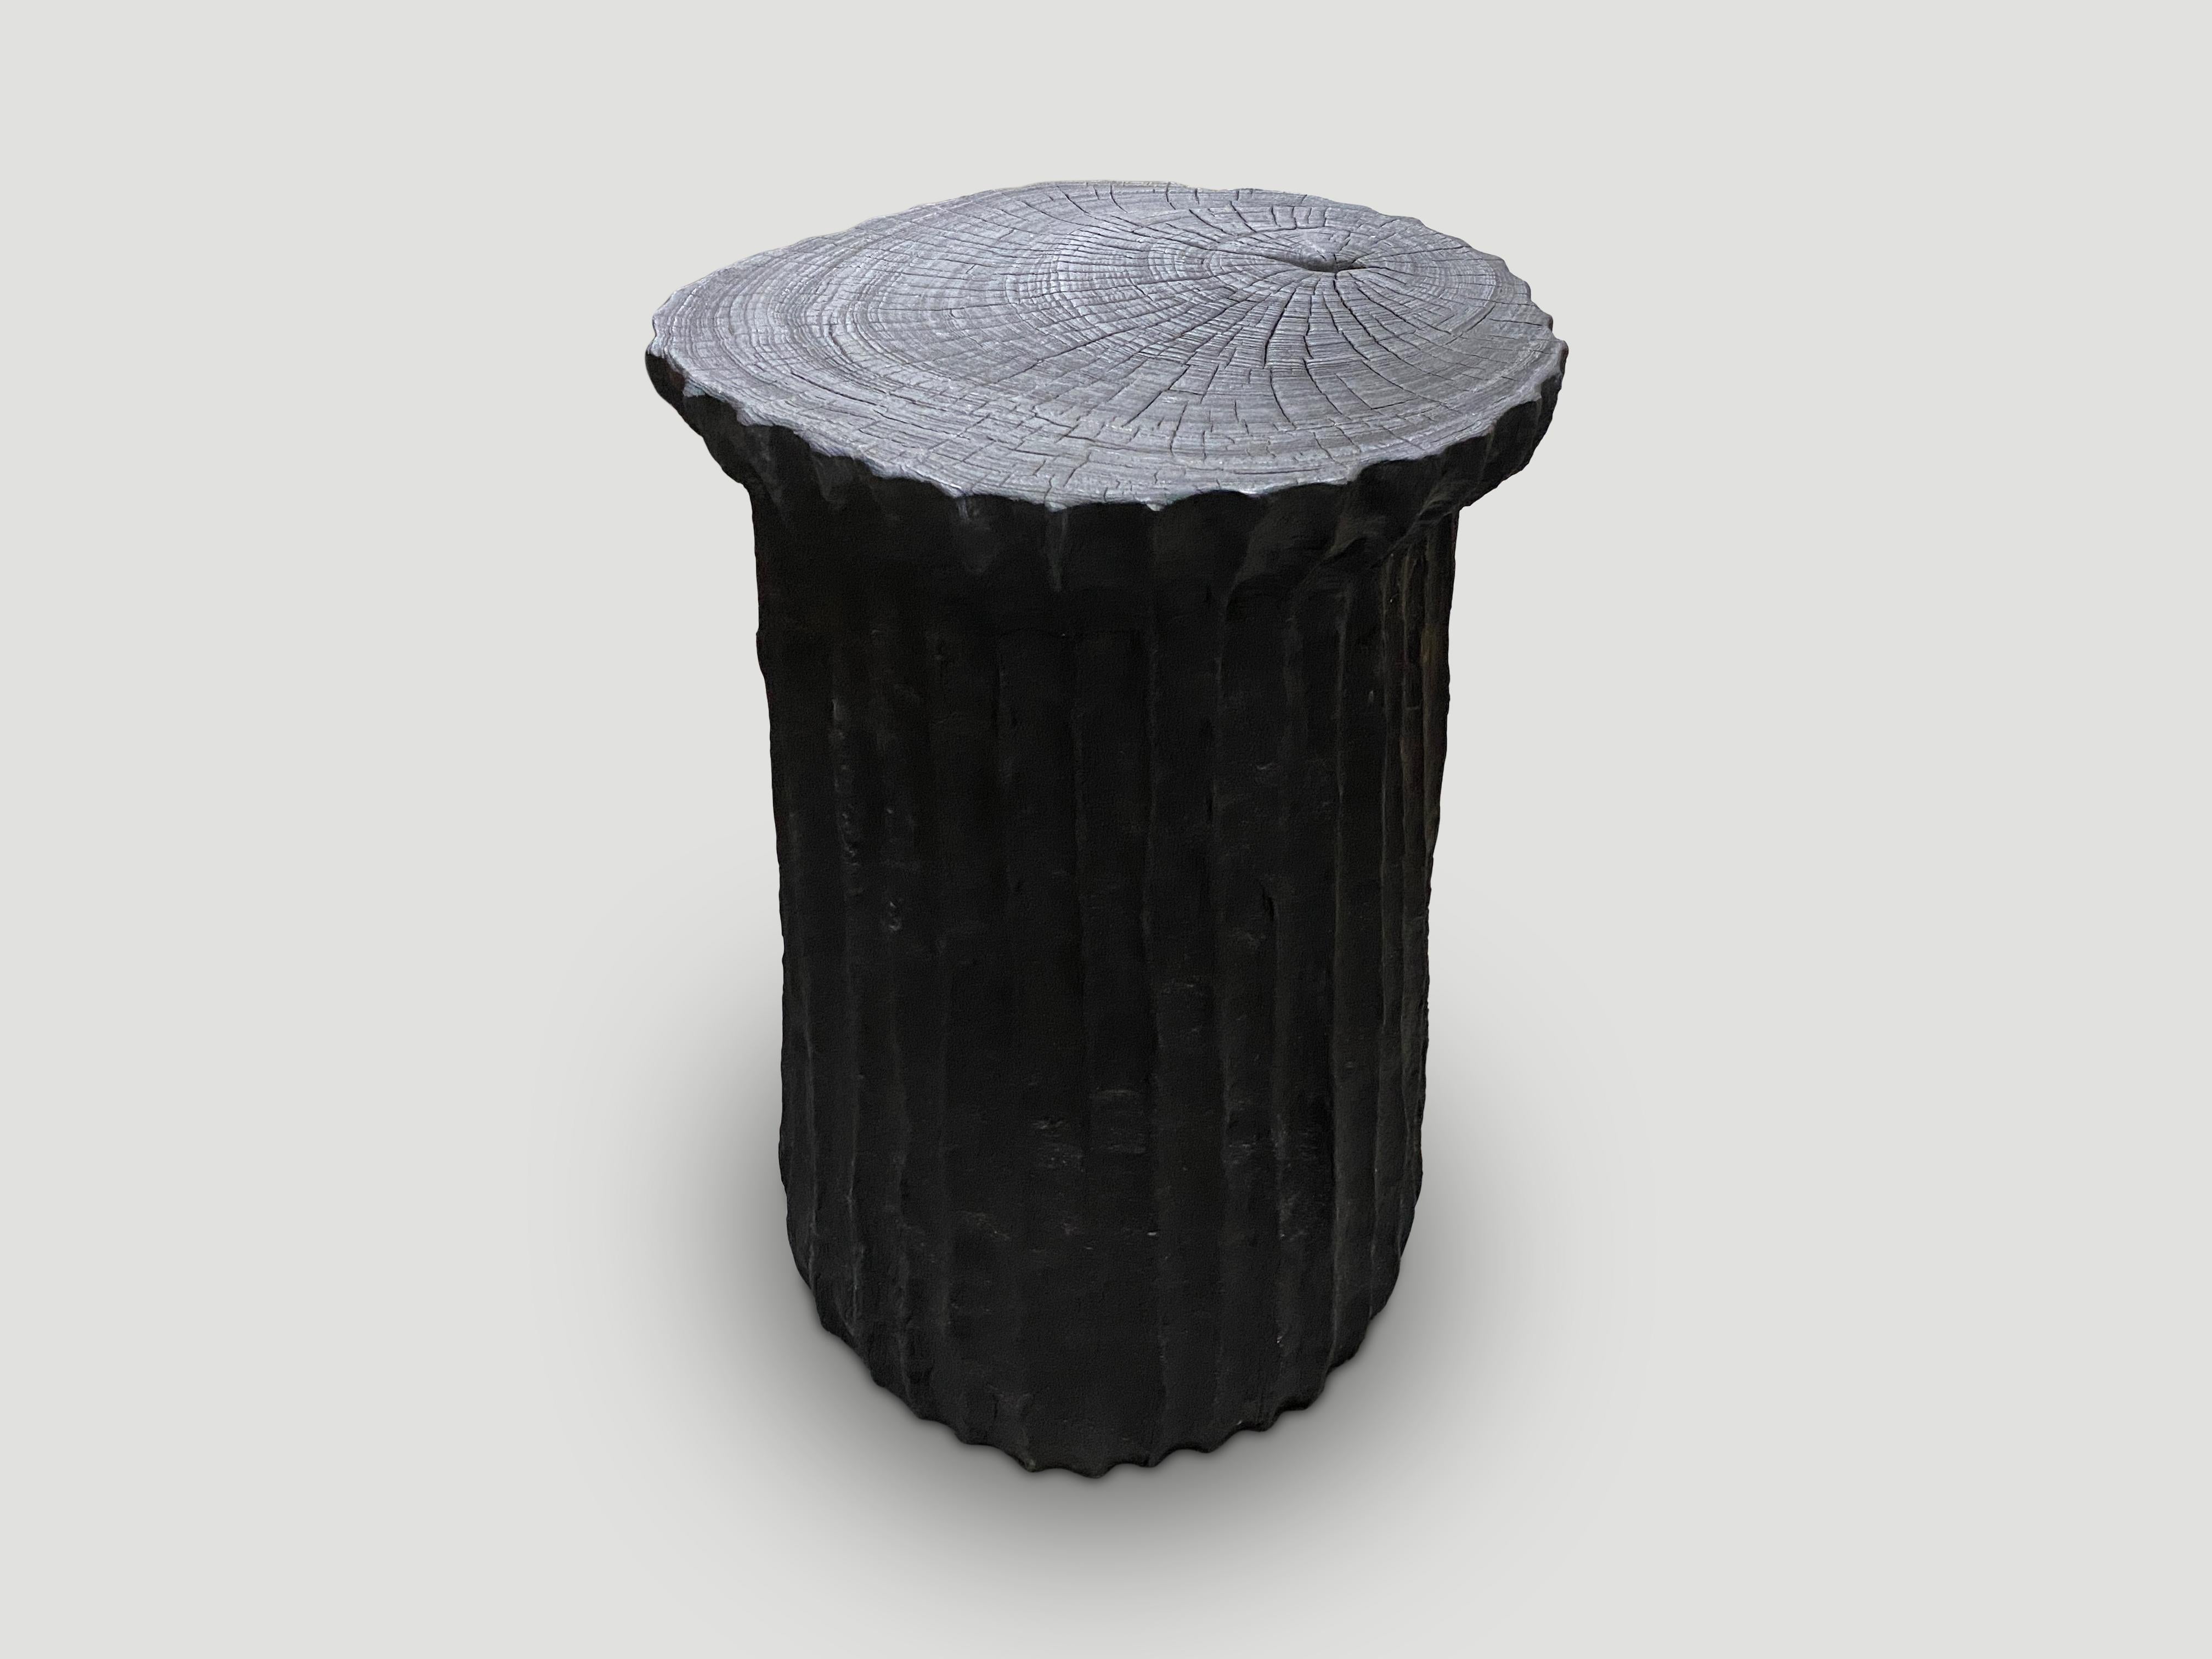 Andrianna Shamaris Charred Teak Wood Minimalist Column Pedestal In Excellent Condition For Sale In New York, NY